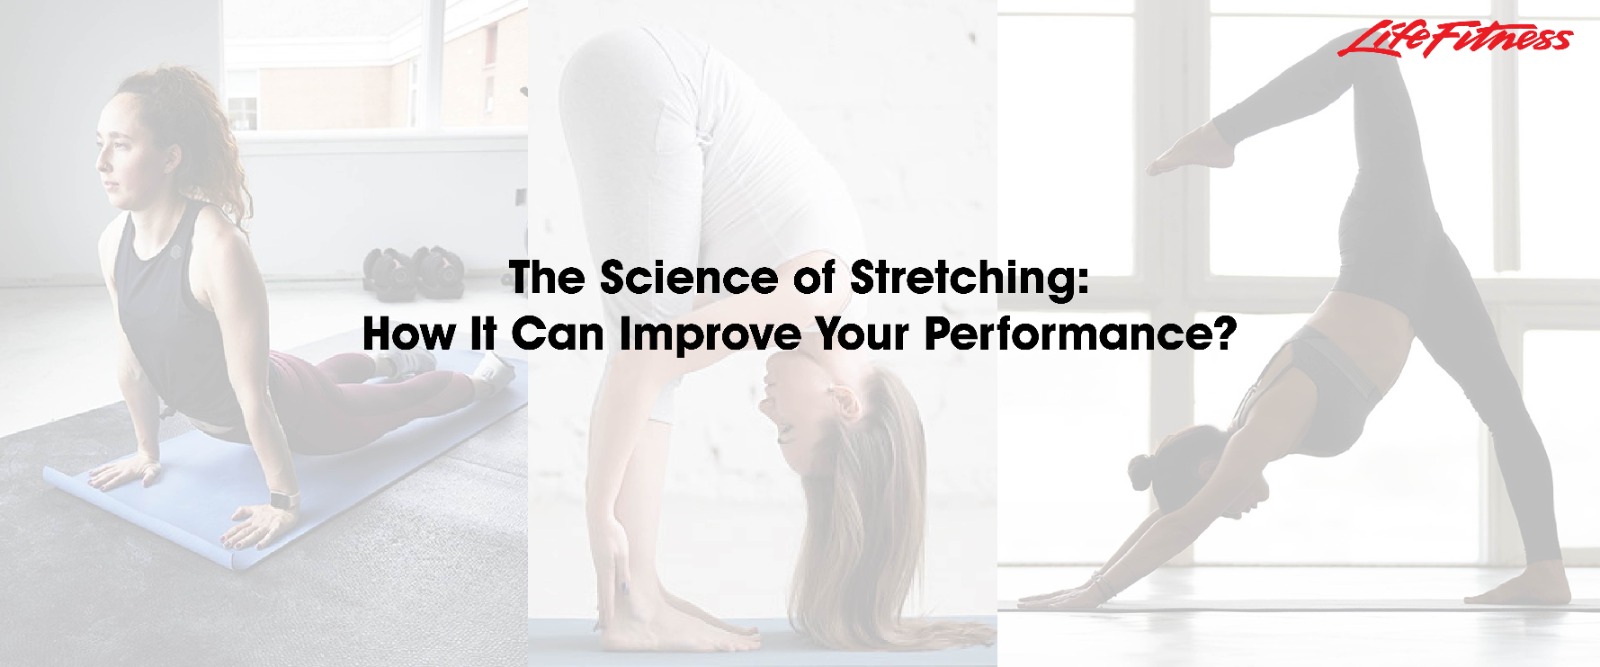 The Science of Stretching: How It Can Improve Your Performance